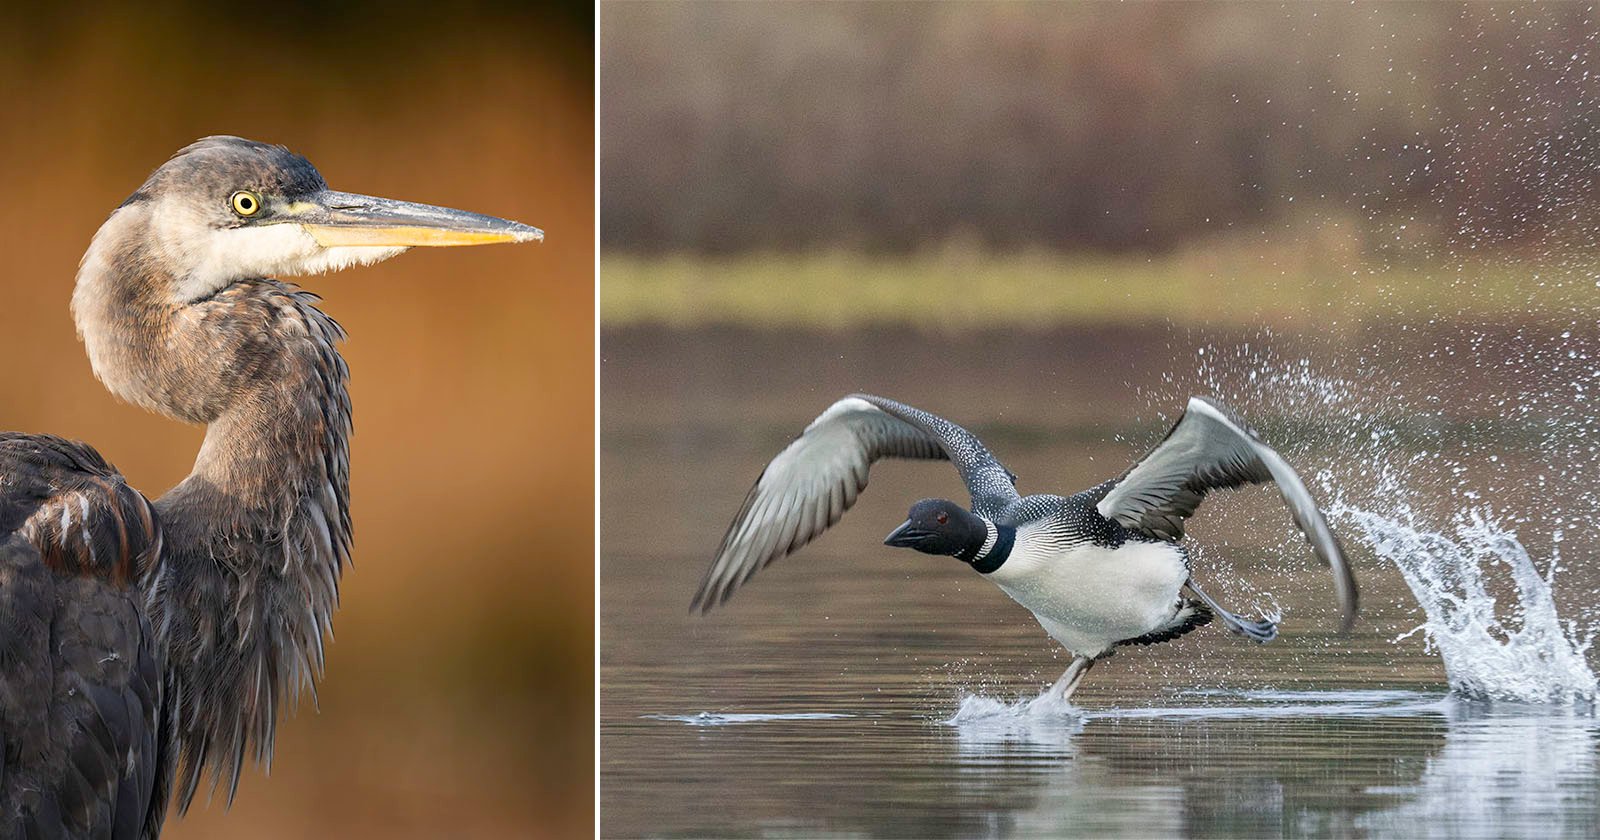 A split image featuring a close-up of a great blue heron on the left and a common loon taking off from water, creating a splash, on the right. both set against natural, blurred backgrounds.